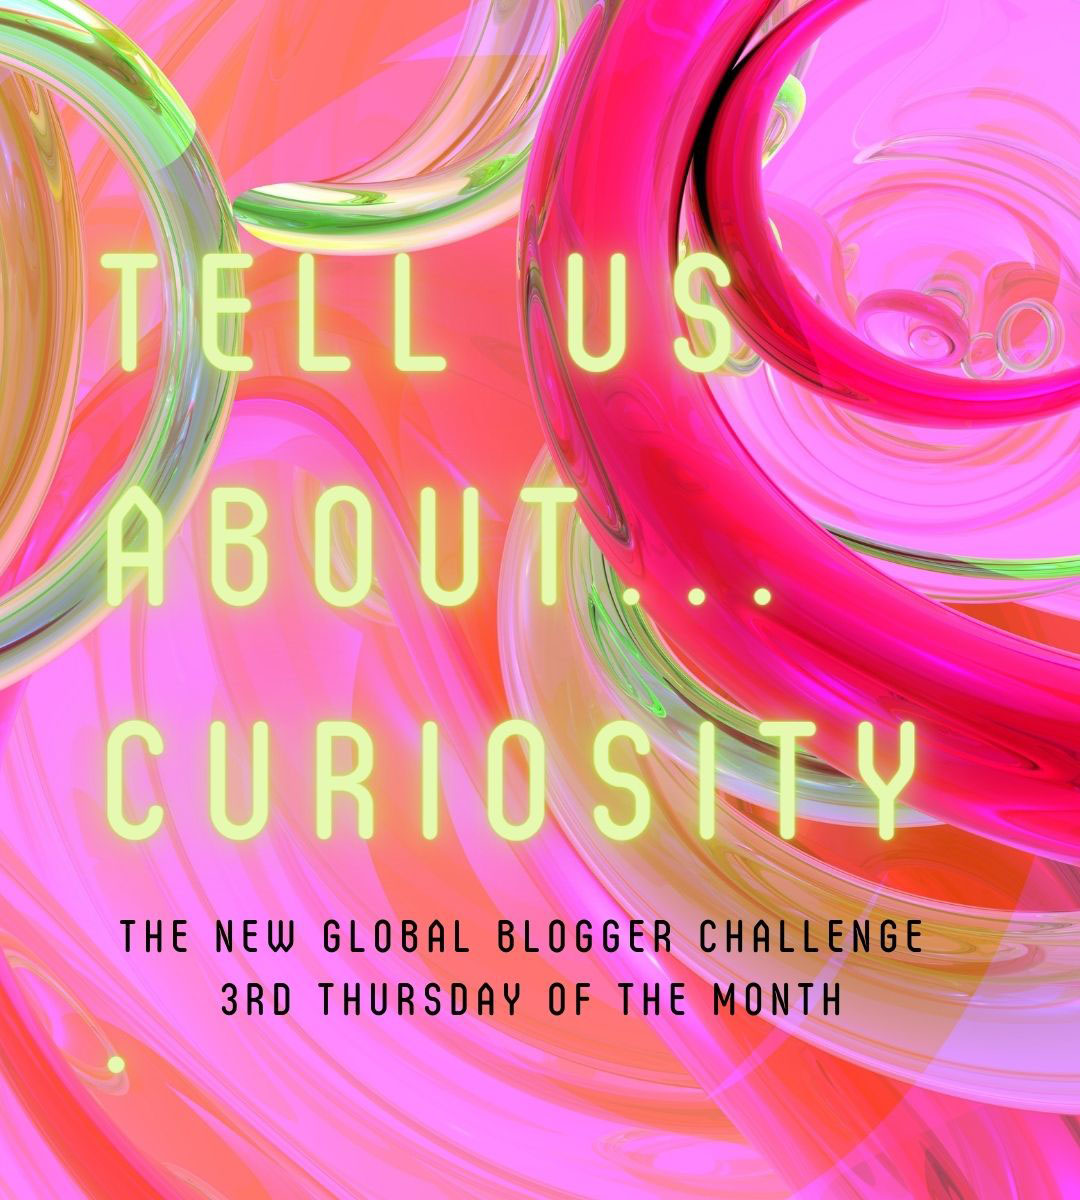 Curiosity is the challenge of the month for the Tell Us About gang